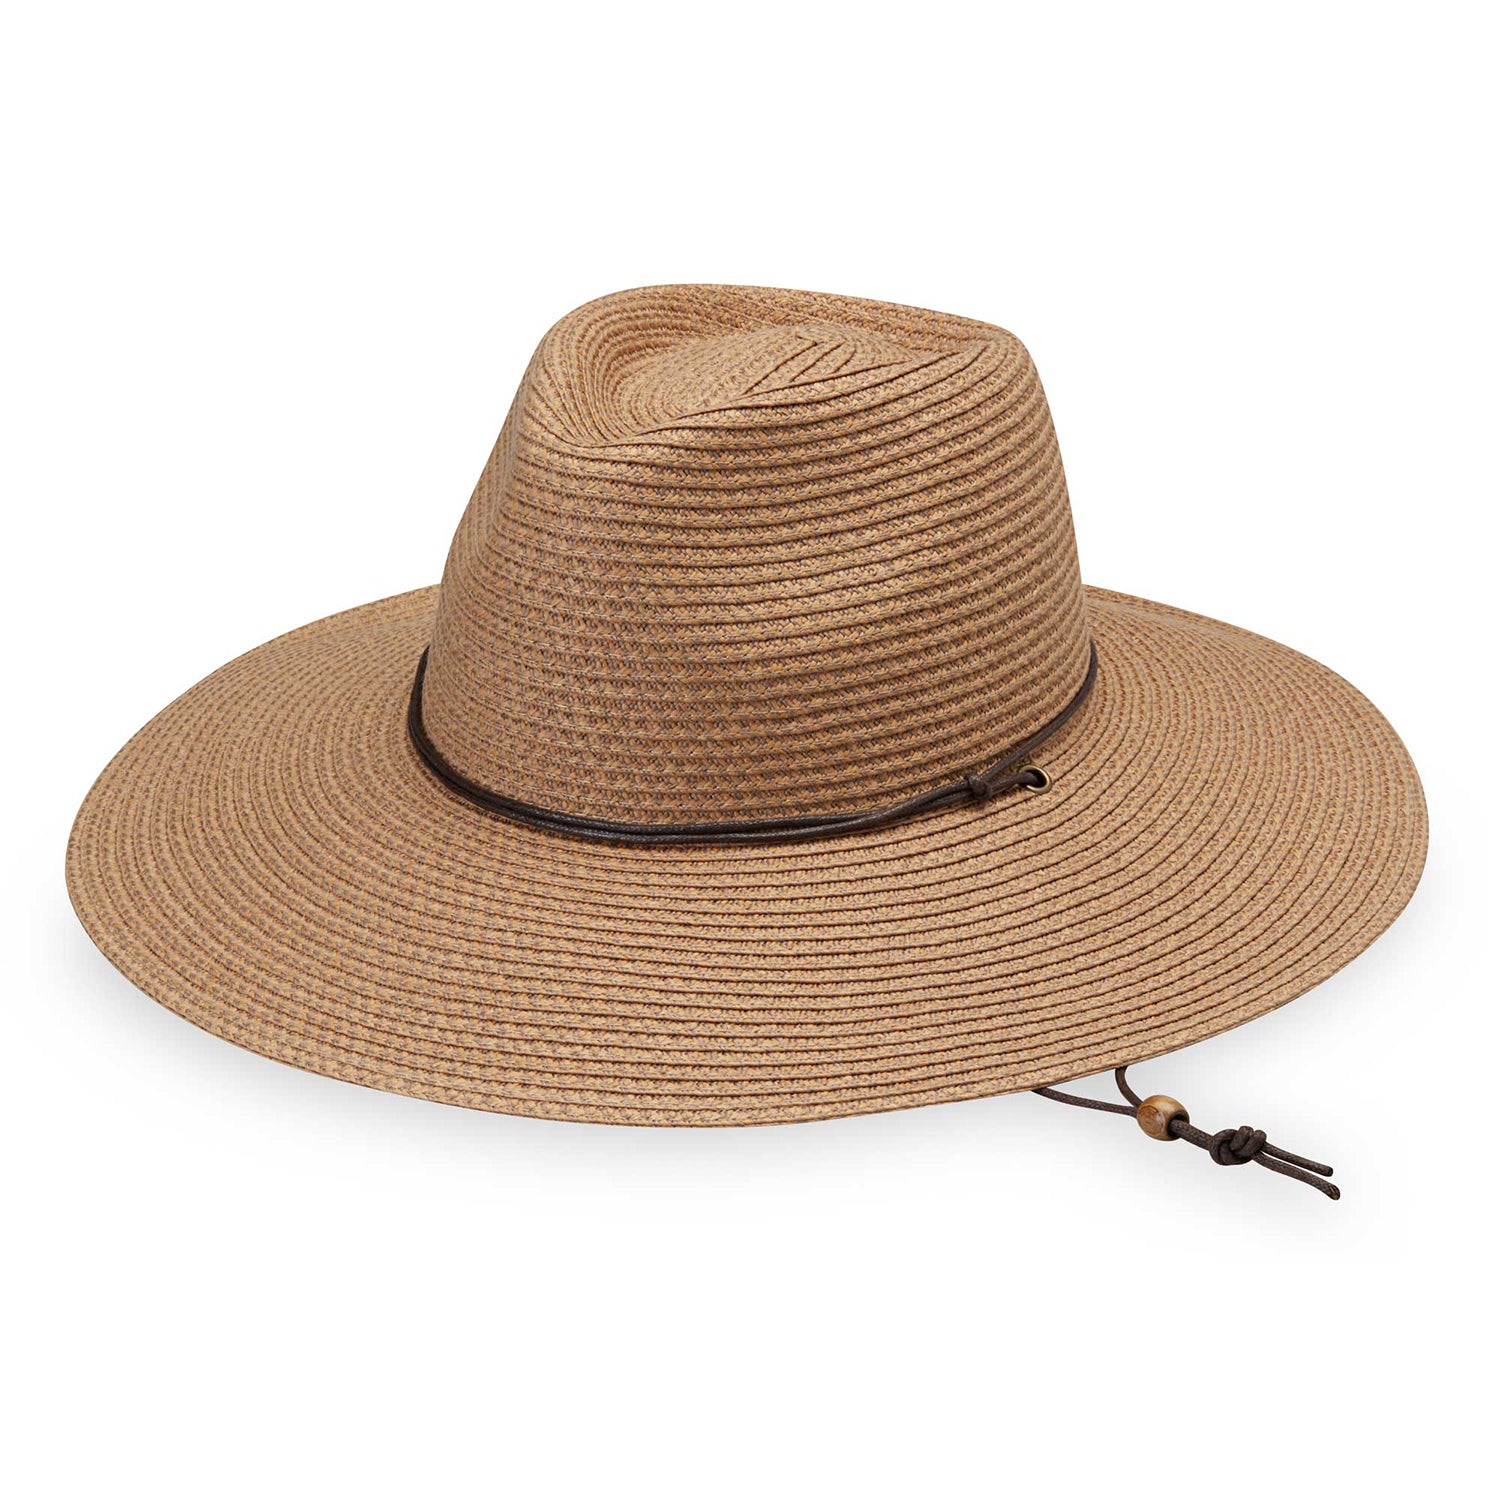 Featuring Big wide brim Sanibel sun hat with chinstrap and made with packable, UPF 50 material